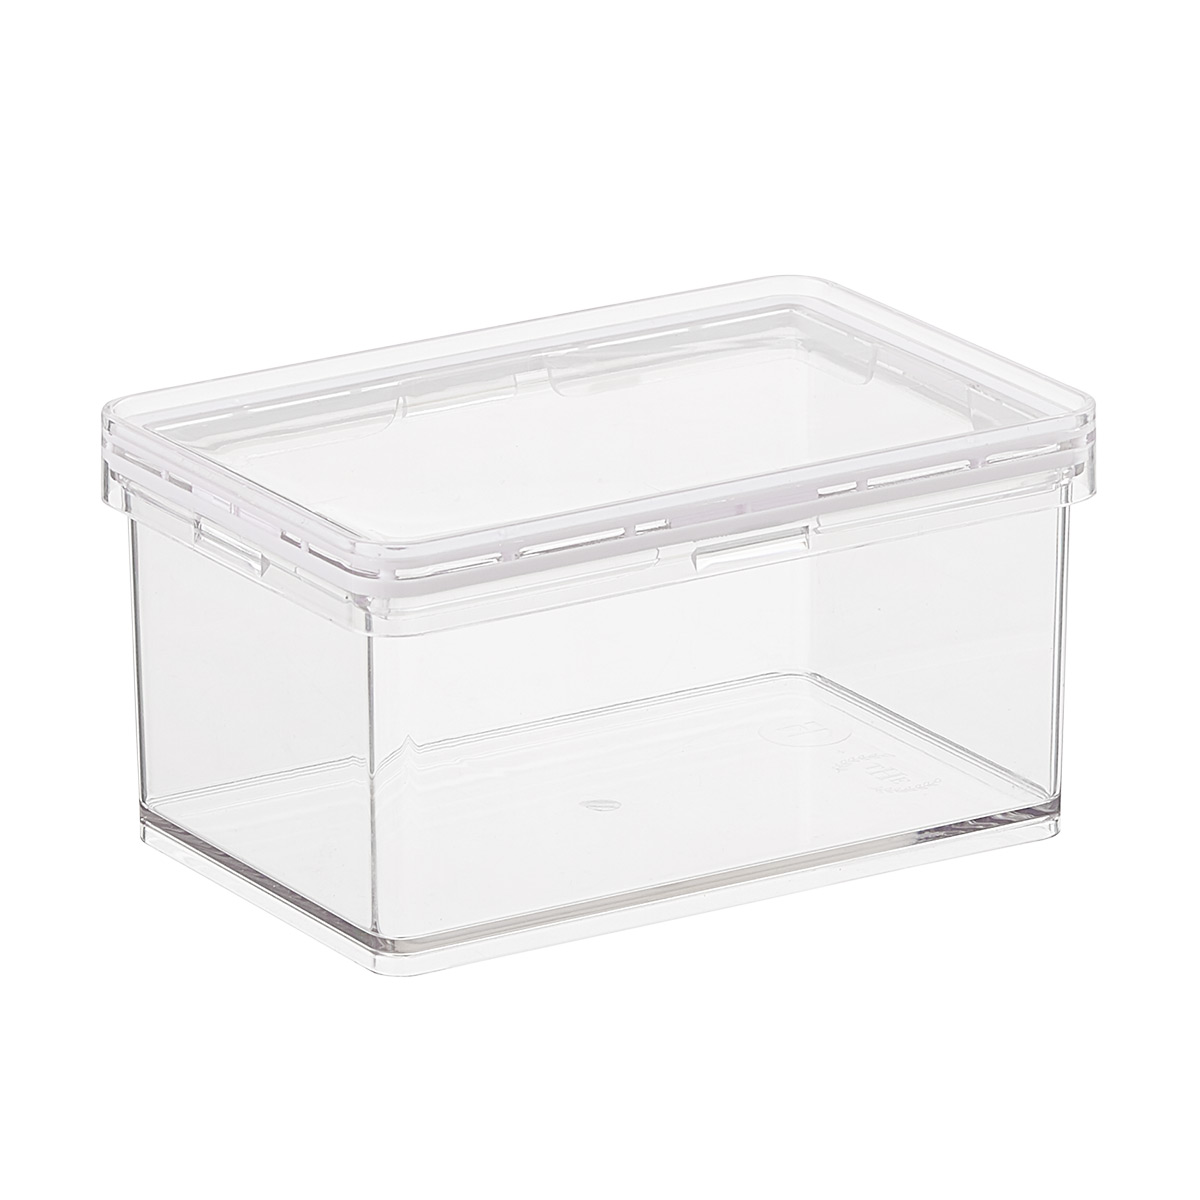 https://www.containerstore.com/catalogimages/364045/10077094-T.H.E.-pantry-canister-smal.jpg